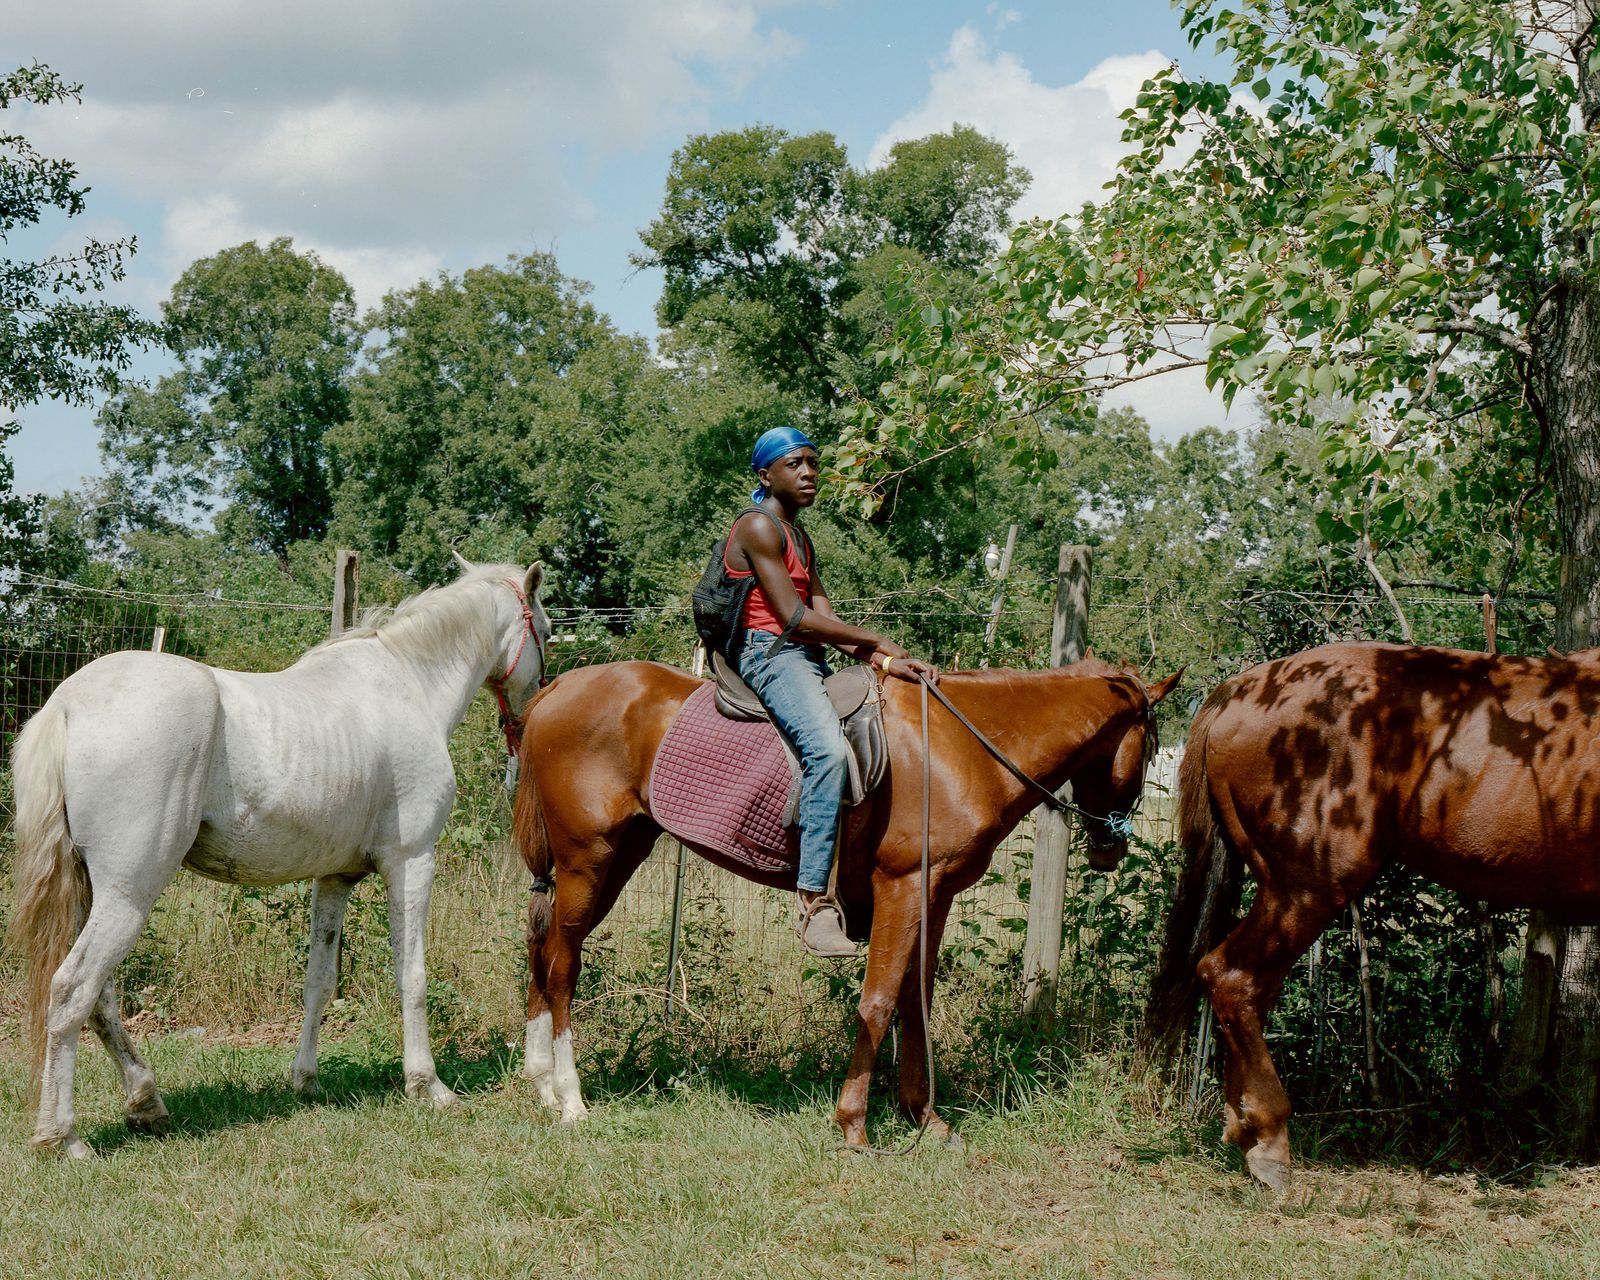 © Kennedi Carter - Image from the Ridin' Sucka Free photography project